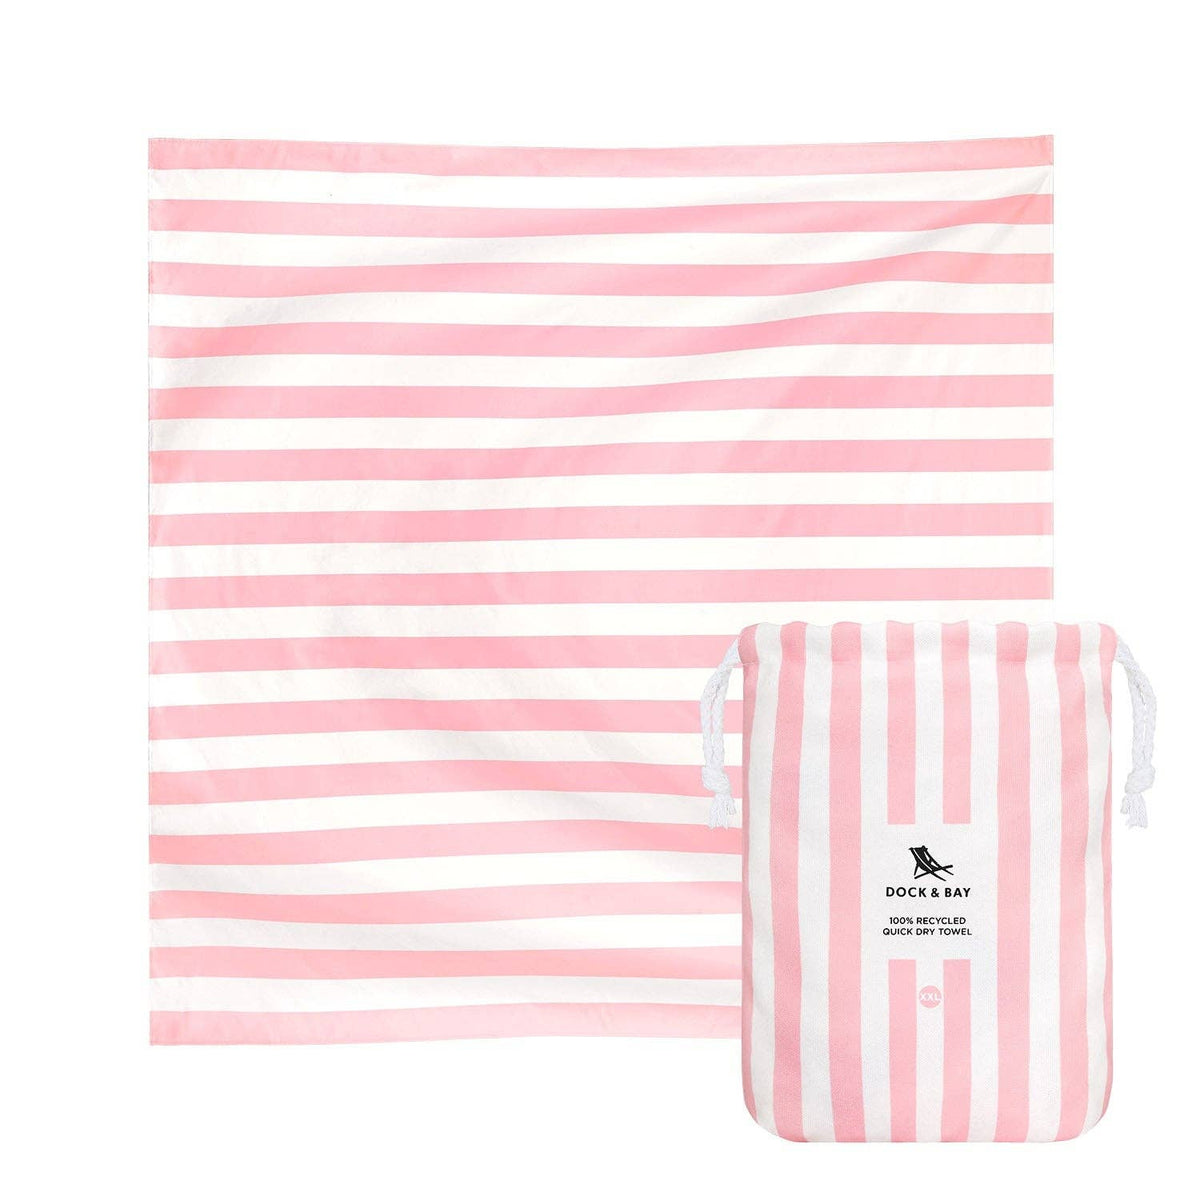 Dock &amp; Bay Quick Dry Towel for Two - Double Extra Large - Malibu Pink - The Preppy Bunny